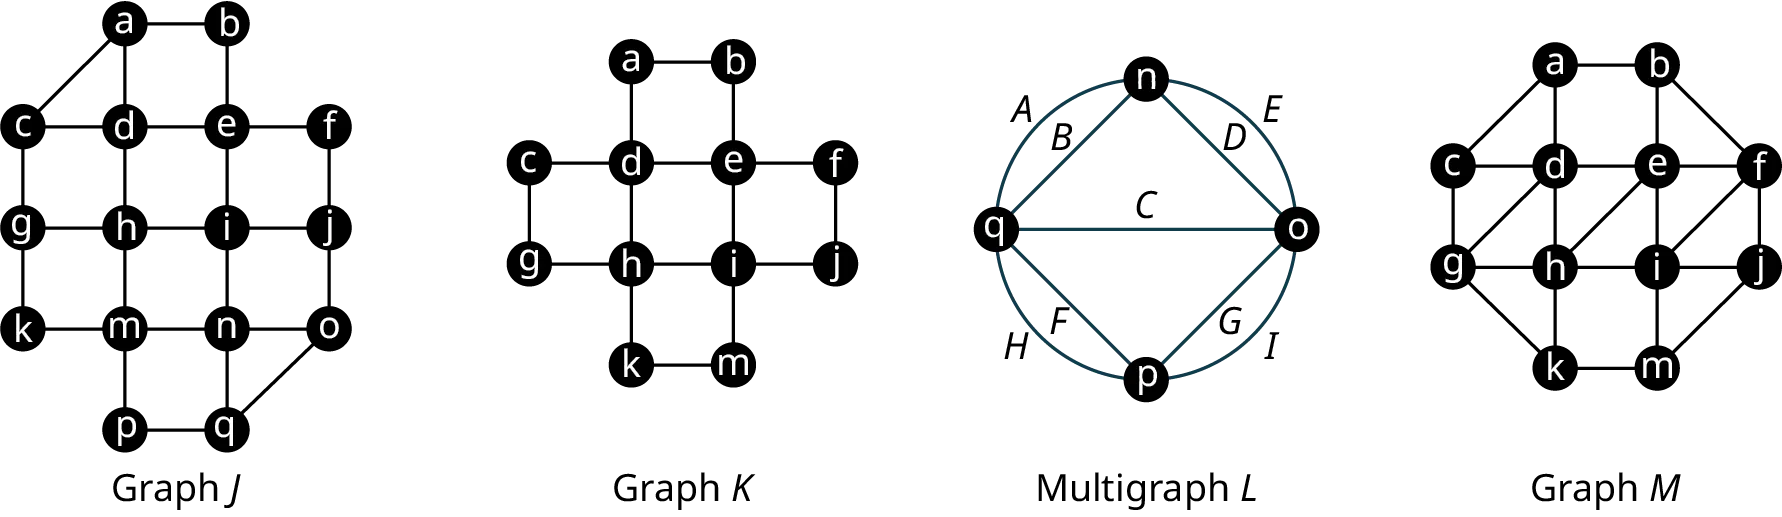 Four graphs. Graph J has 16 vertices. The edges are a b, a c, a d, b e, c d, d e, e f, c g, d h, e i, f j, g h, h i, i j, g k, h m, i n, j o, k m, m n, n o, m p, n q, o q, and p q. Graph K has 12 vertices. The edges are a b, a d, b e, c d, d e, e f, c, d h, e i, f j, g h, h i, i j, h k, i m, and k m. Multigraph L has four vertices. The straight edges are labeled as follows: n q, B; no, D; q p, F; o p, G; q c, C. The curved edges are labeled as follows: q n, A; n o, E; o p, I; p q, H. Graph M has 12 vertices. The edges are labeled a b, a c, a d, b e, b f, c d, d e, e f, c g, g d, d h, h e, e i, i f, f j, g h, h i, i j, g k, h k, i m, j m, and k m.